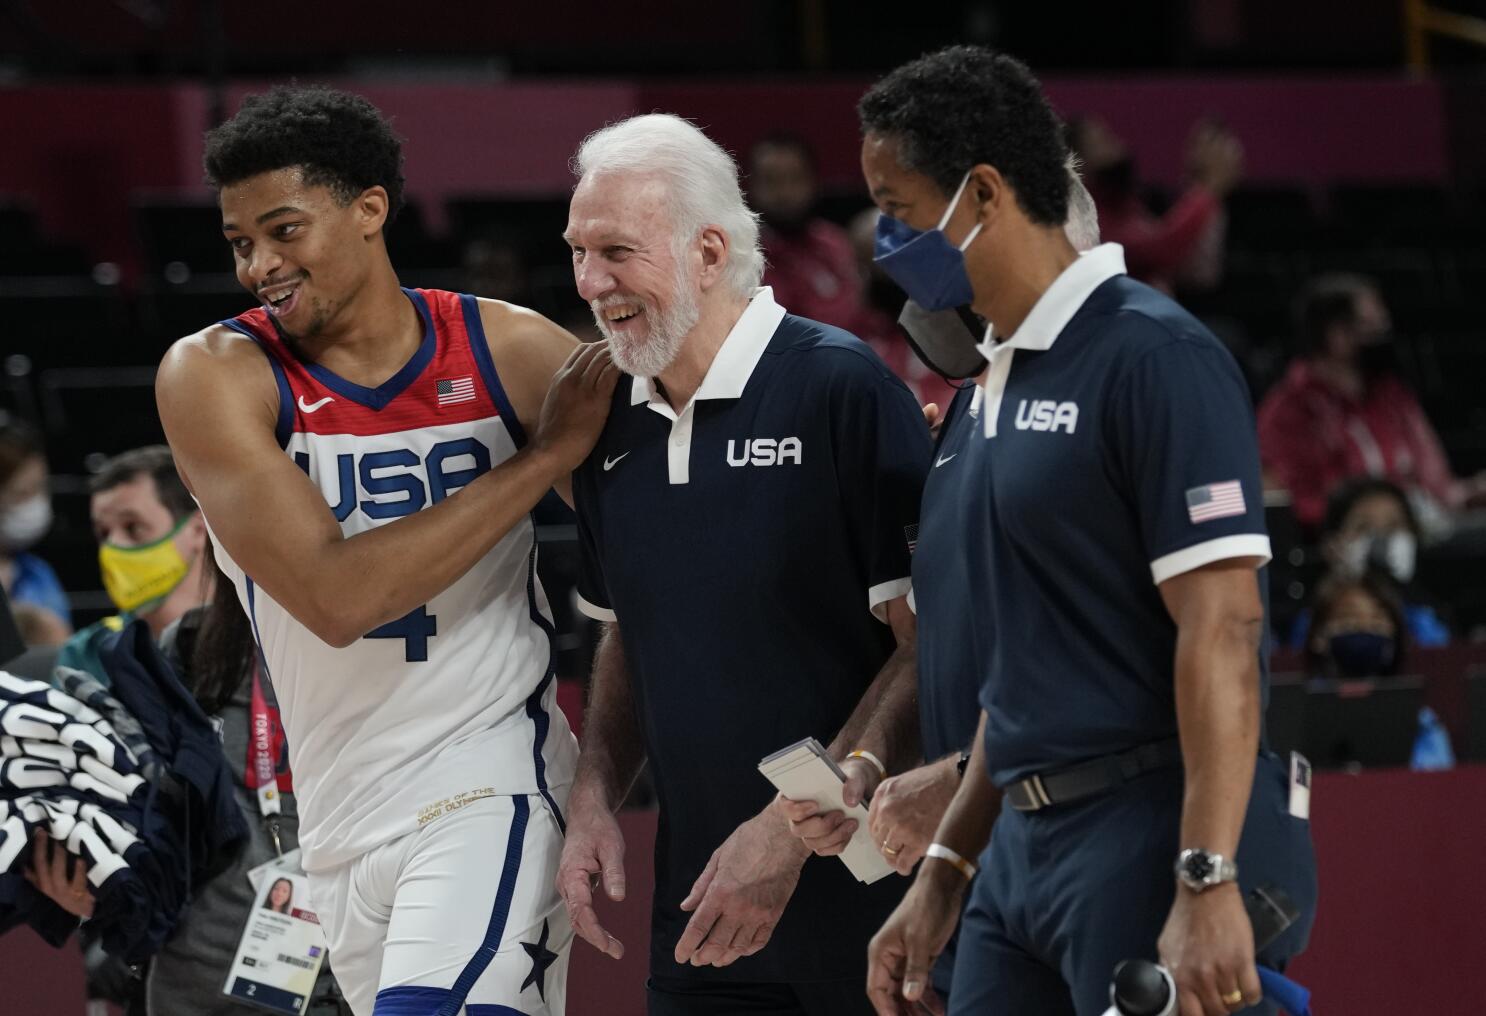 Tatum Grabs Gold, Scores 19 Points in Team USA's Olympic Win